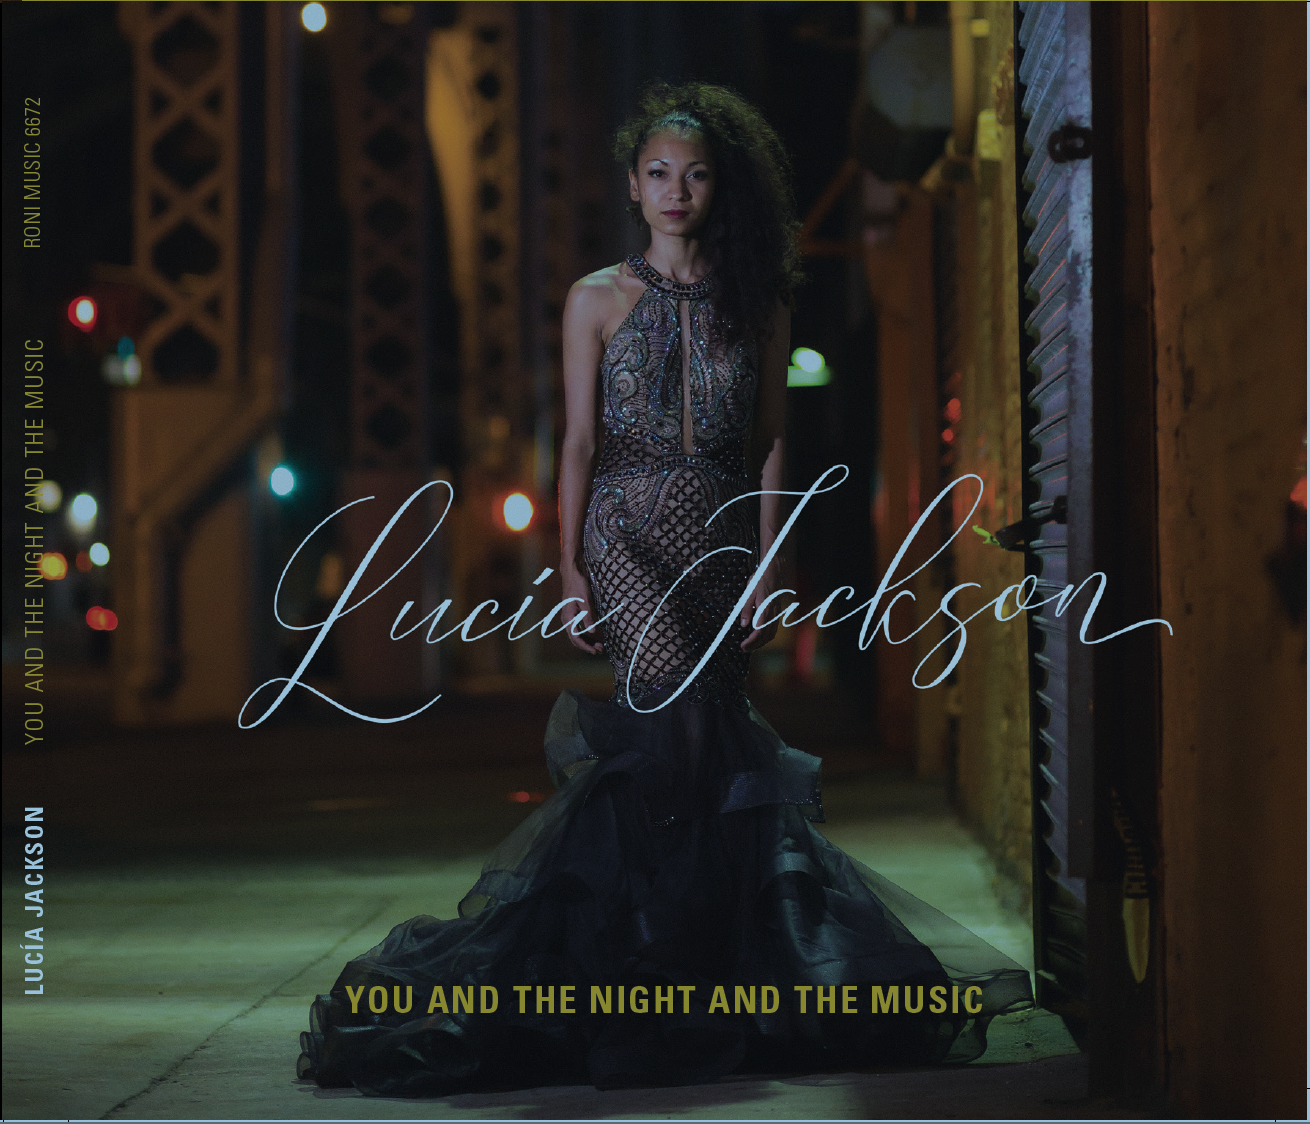 Image result for lucia jackson jazz singer high res photo